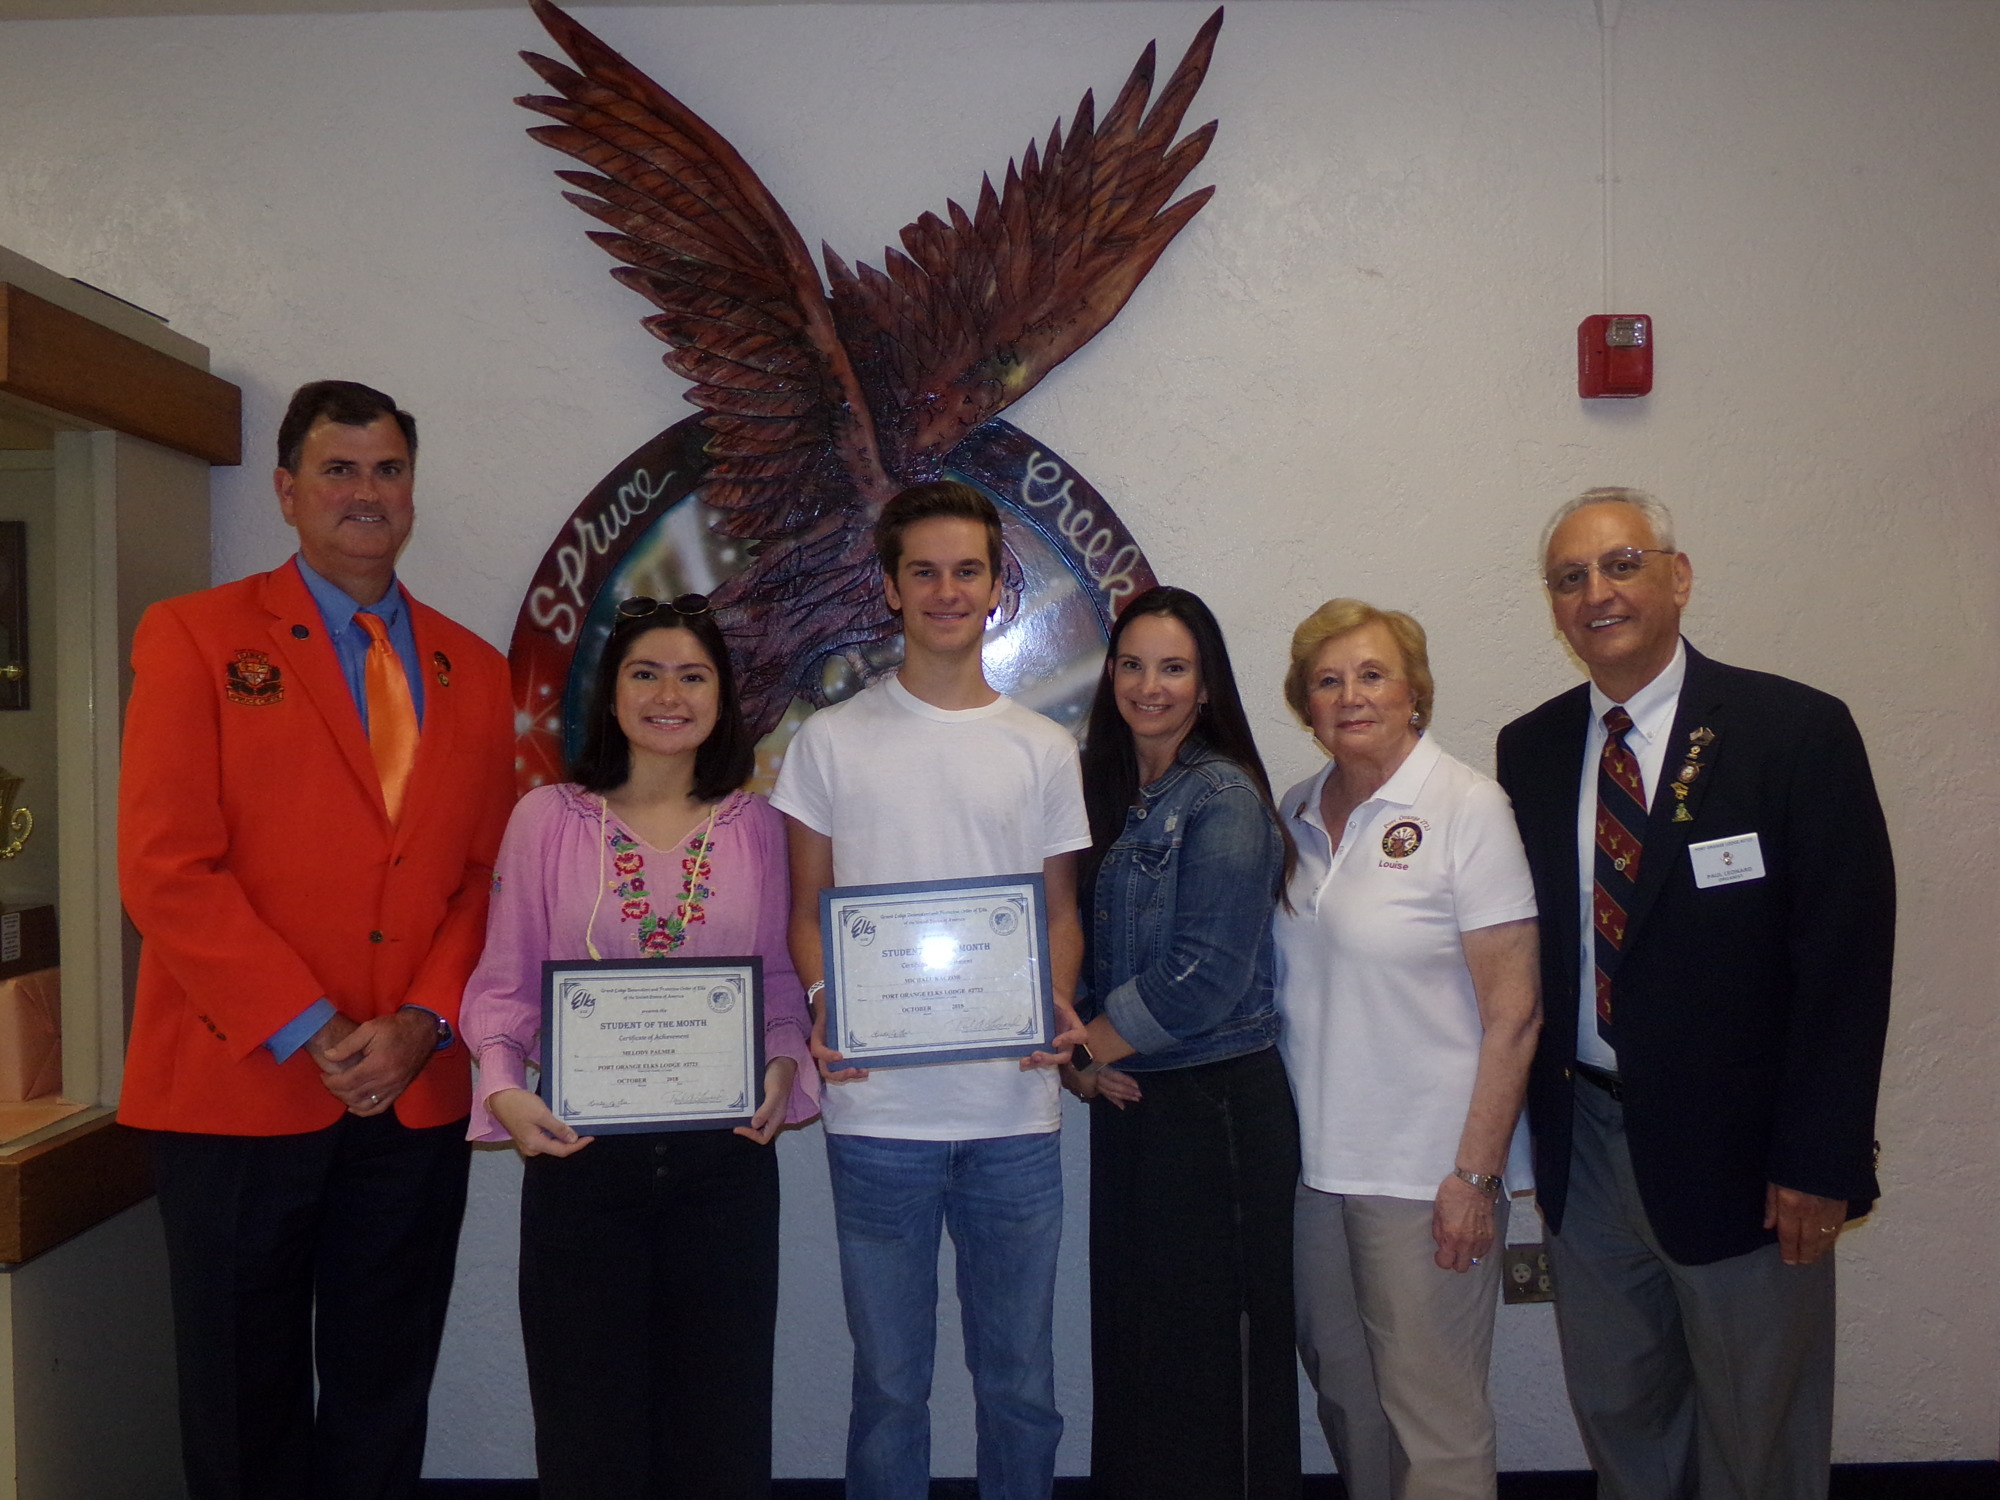 From left:  Principal Todd Sparger; Students Melody Palmer, of Ormond Beach, and Michael Kaczor, of Port Orange, Guidance Counselor Karie Cappiello, Mrs Louise Lauthain and Paul  Leonard. Courtesy photo